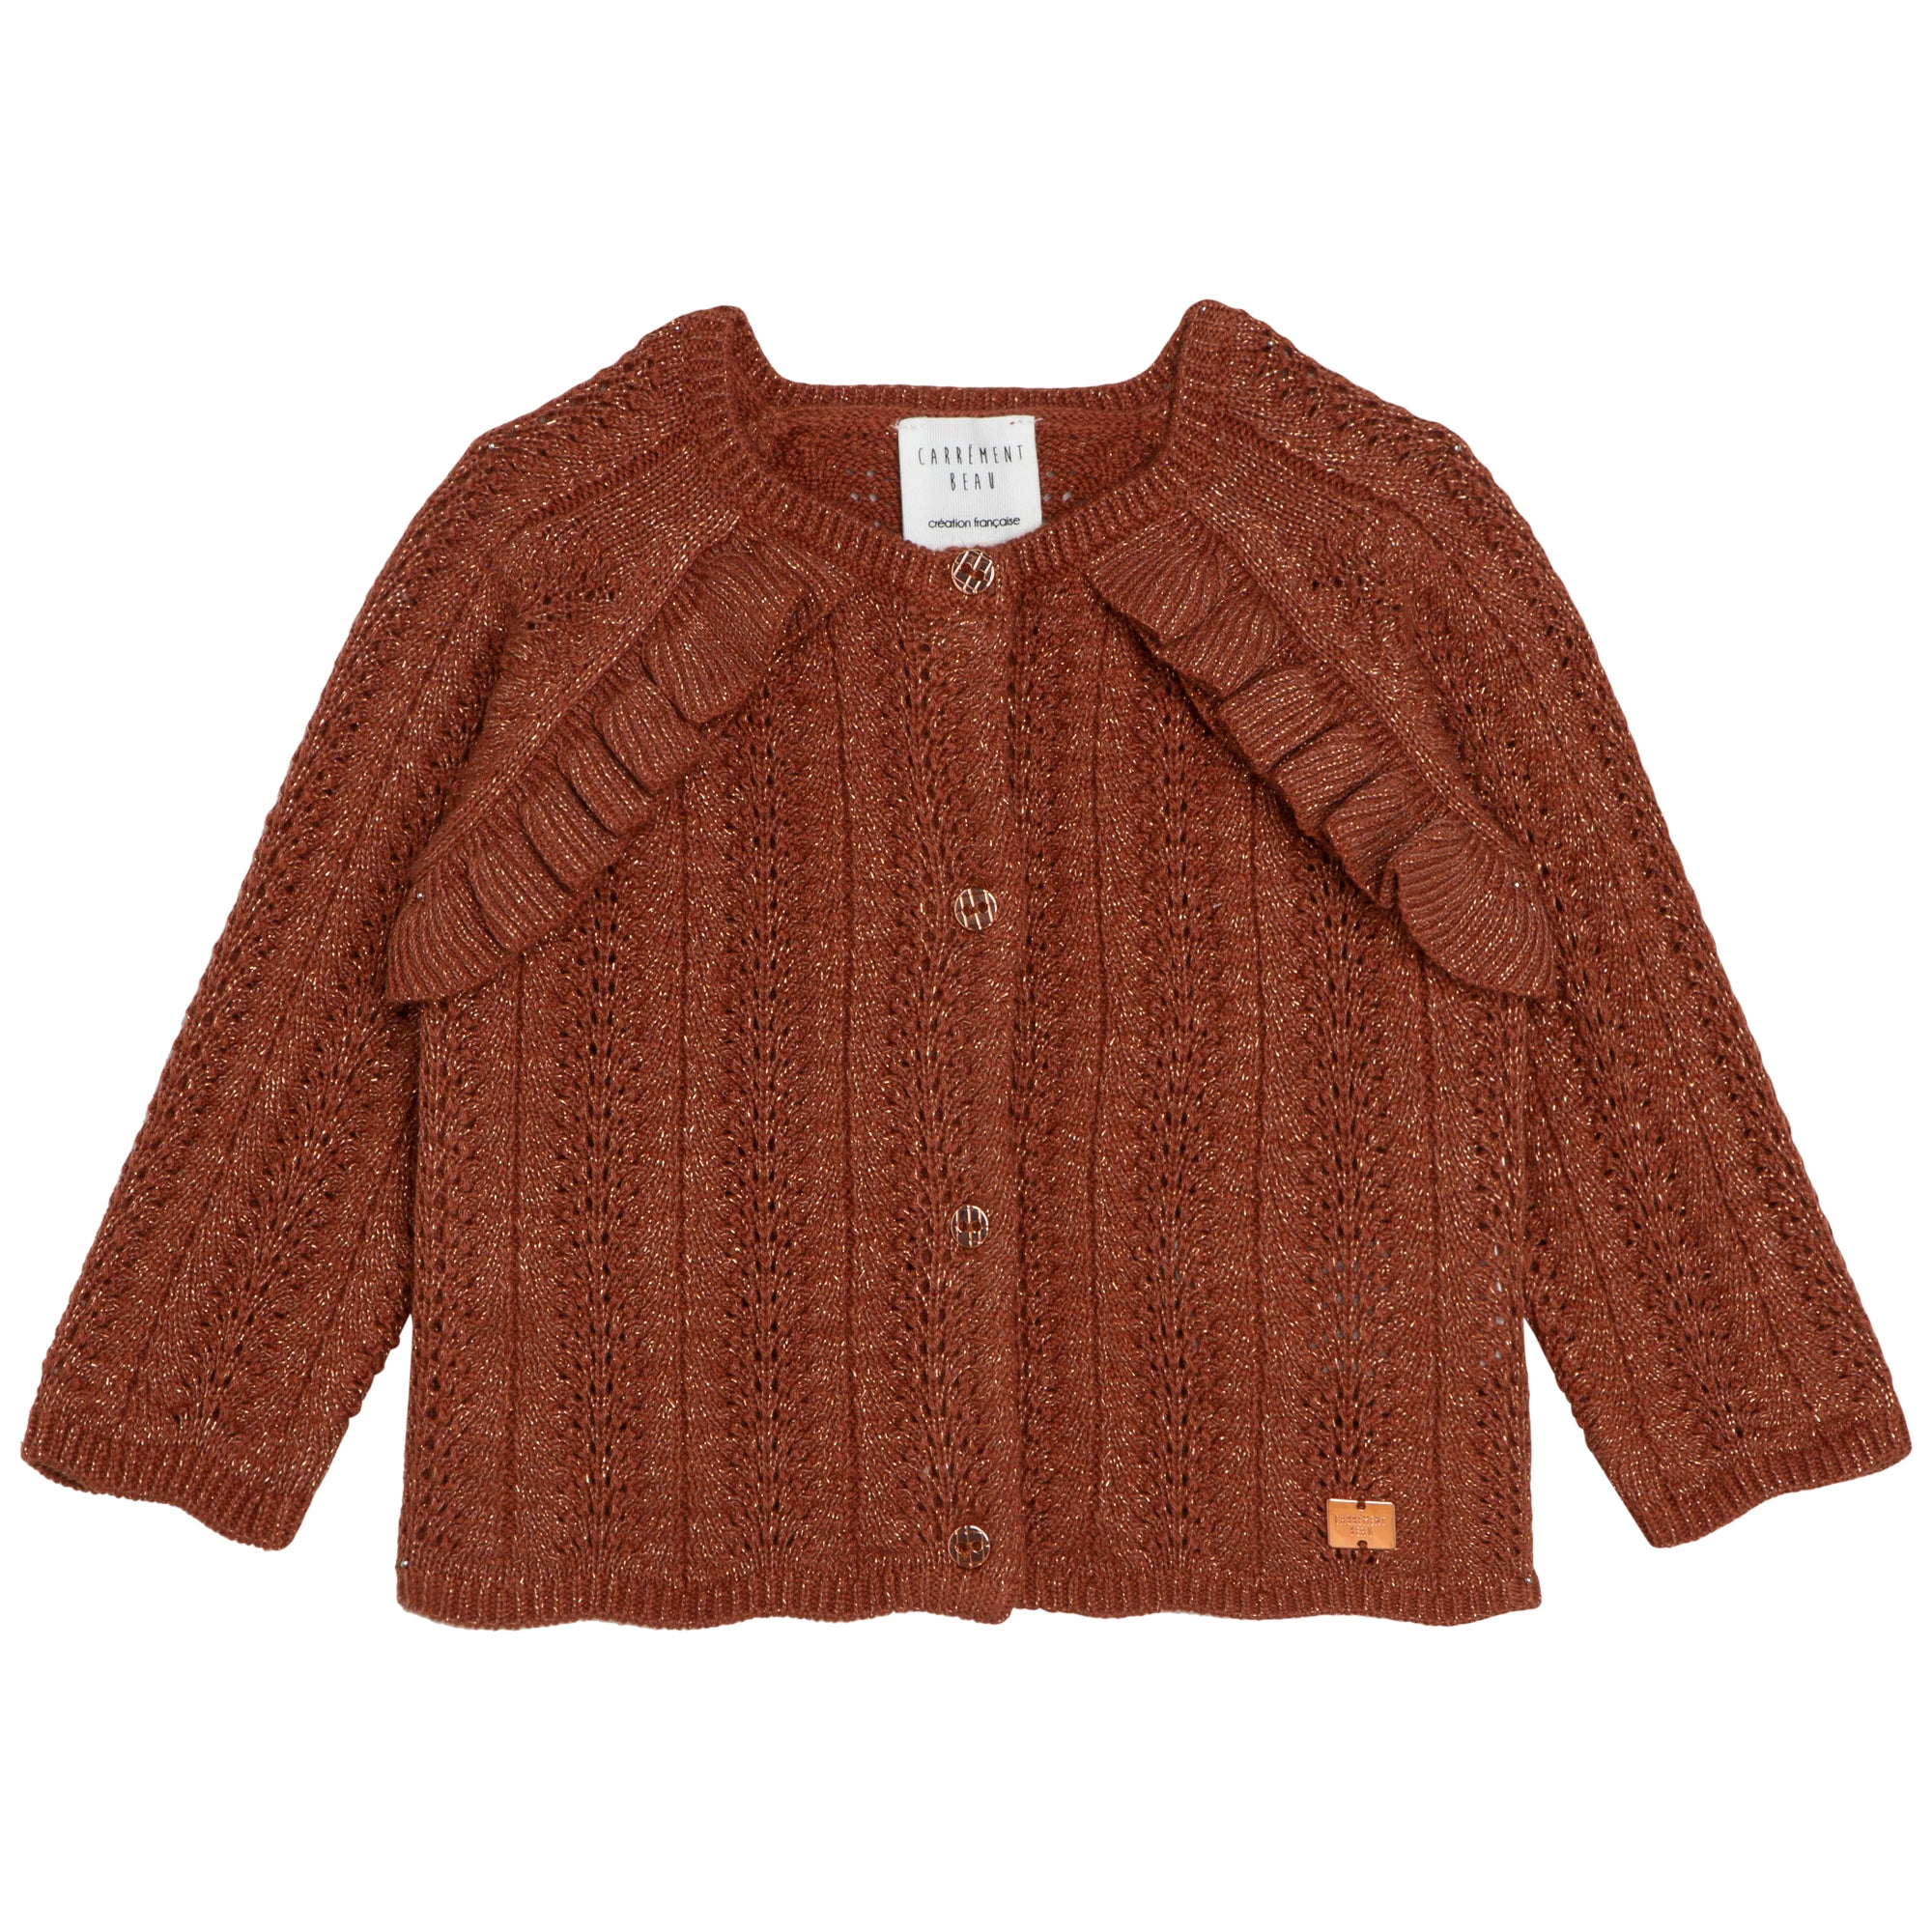 Carrement Beau - Cotton and Wool Knit Cardigan